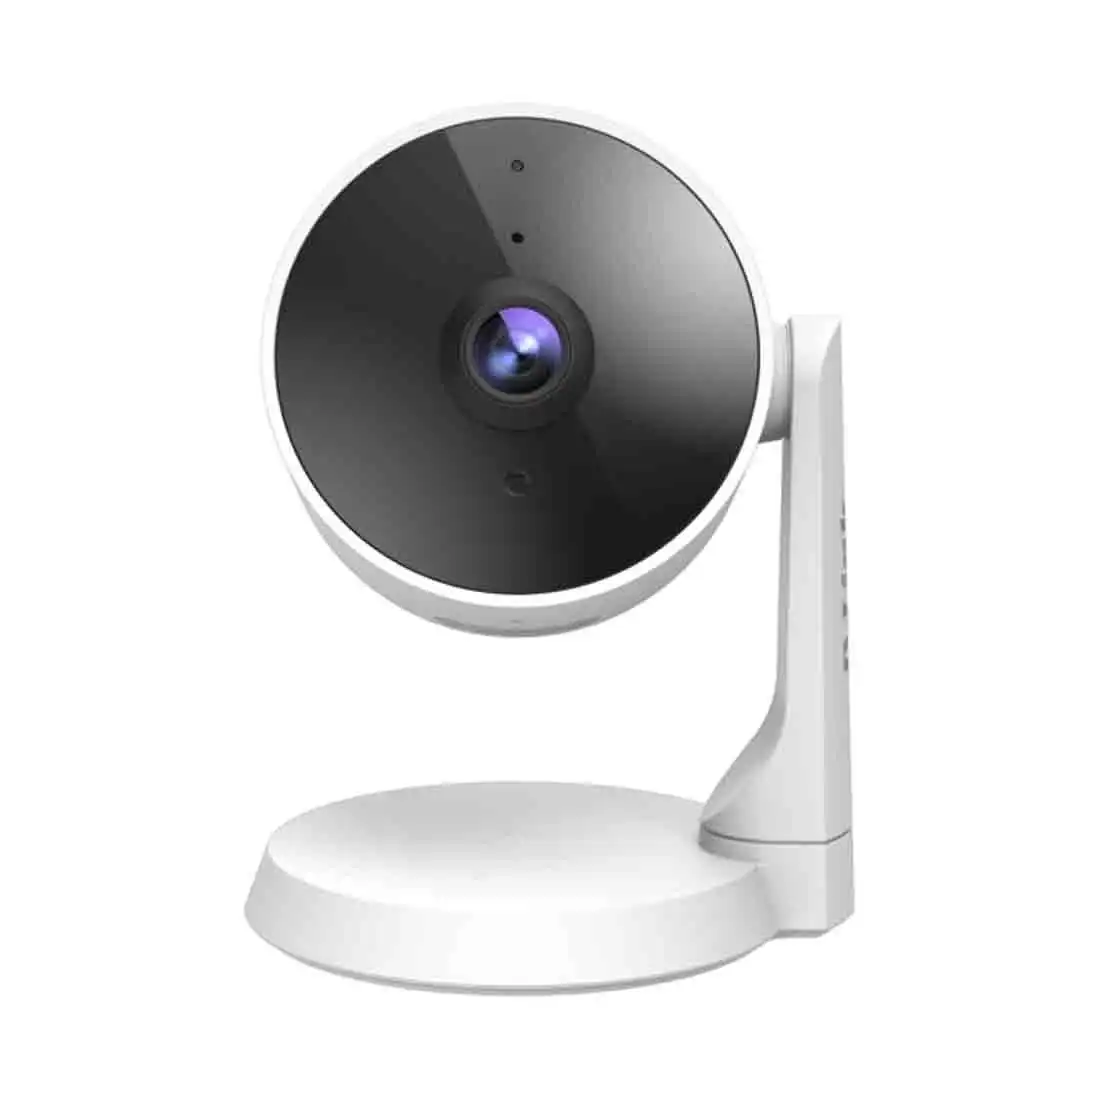 D-Link DCS-8330LH Smart Full HD Wi-Fi Camera with Built-in Smart Home Hub